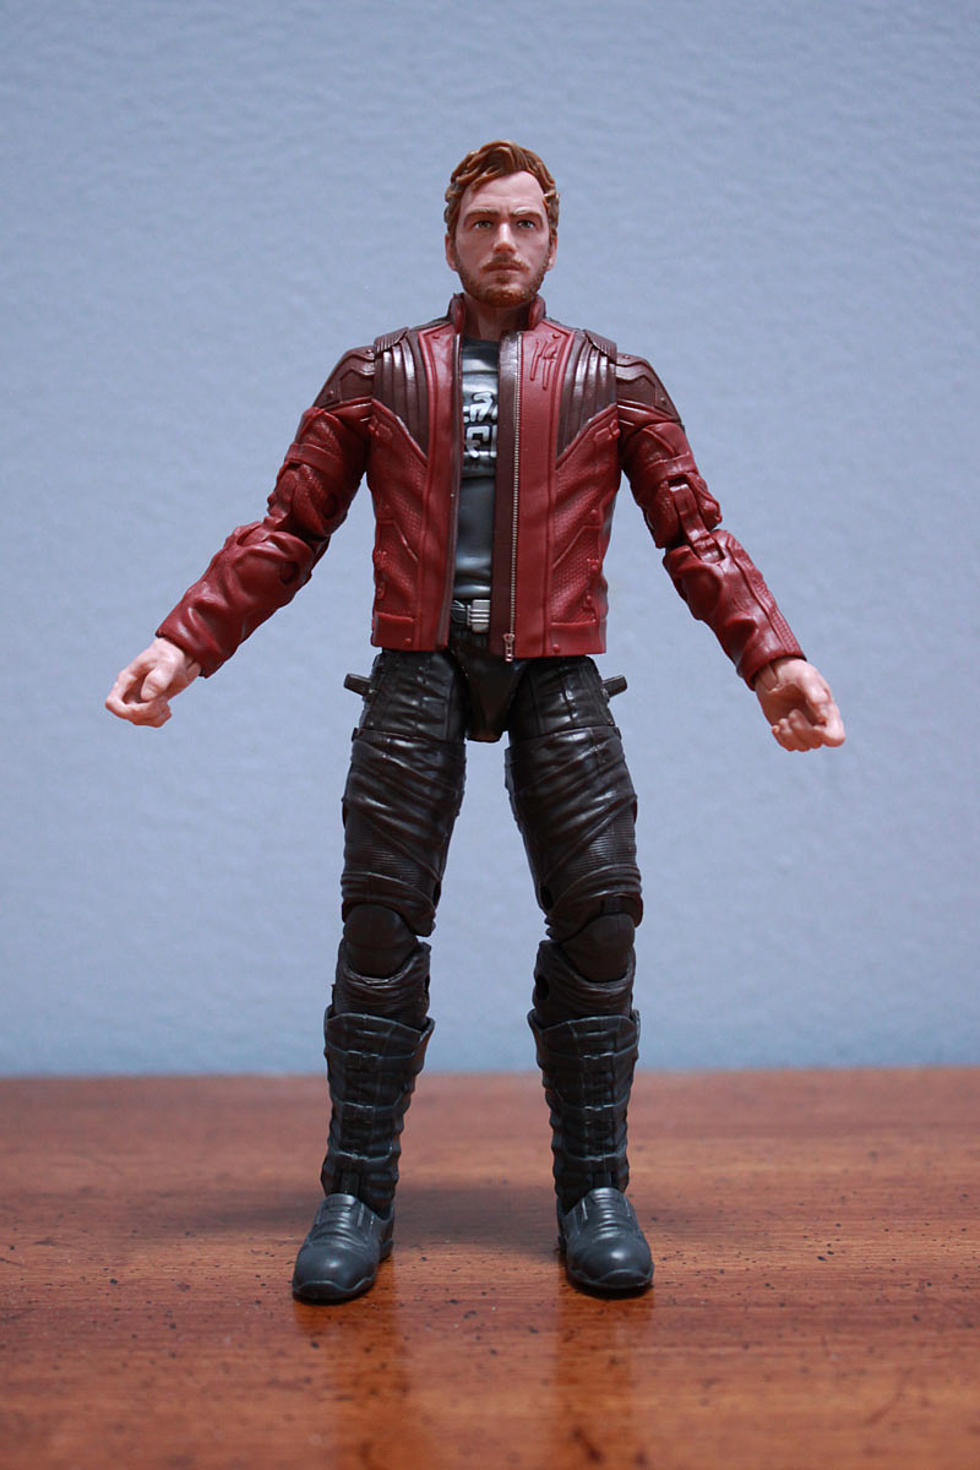 Guardians of the Galaxy Vol. 2 Marvel Legends Titus Series Star-Lord Action  Figure